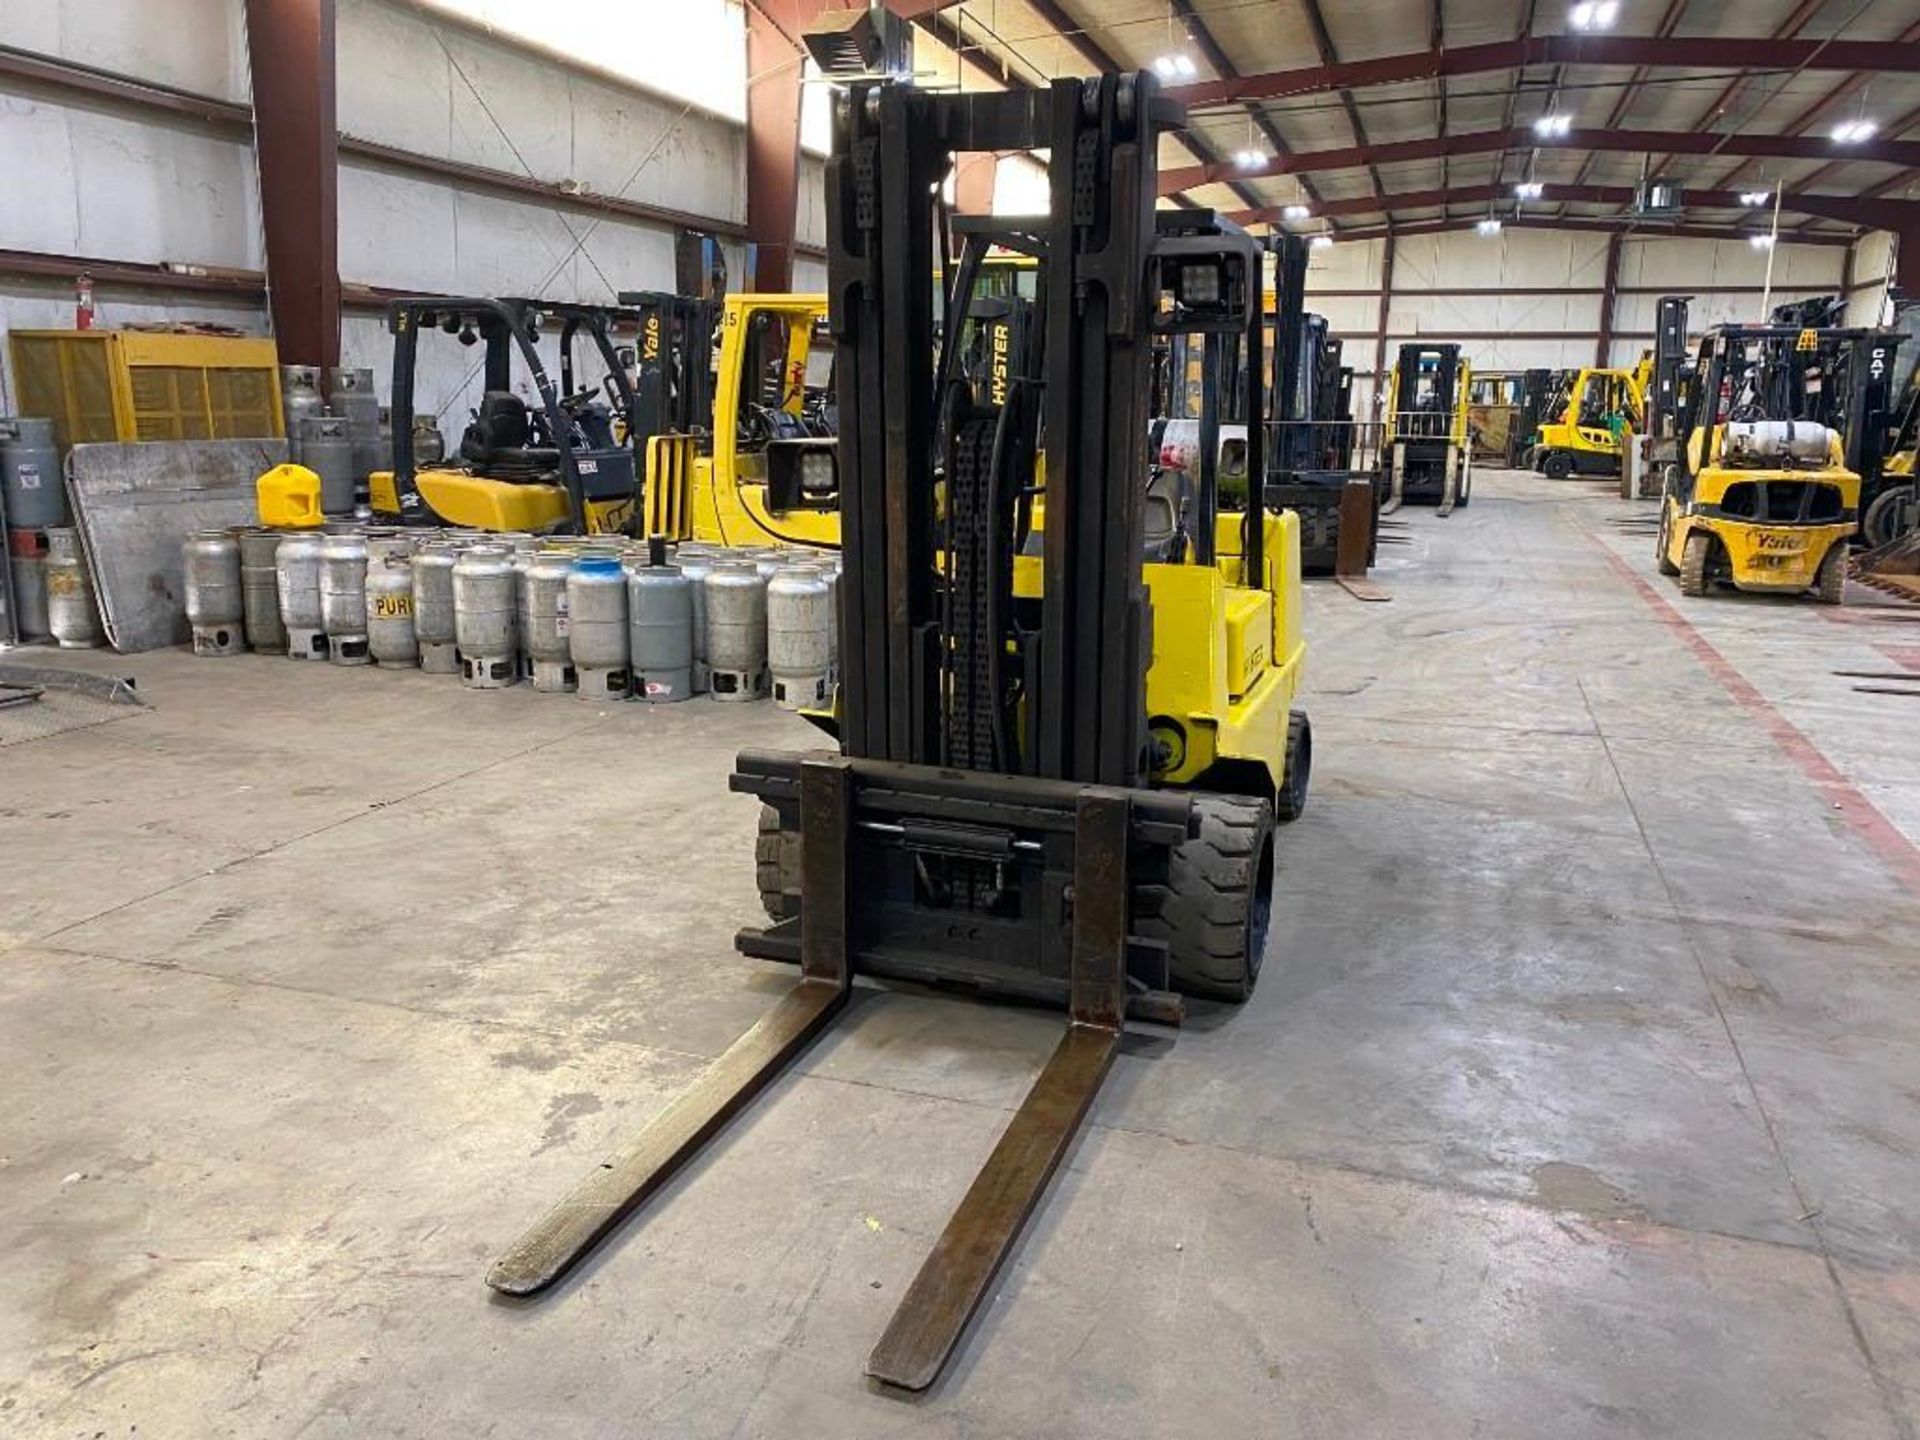 Hyster 10,000-LB. Capacity Forklift, Model S100XL2, S/N D004D09664X, LPG, Treaded Tires, 3-Stage Mas - Image 2 of 5